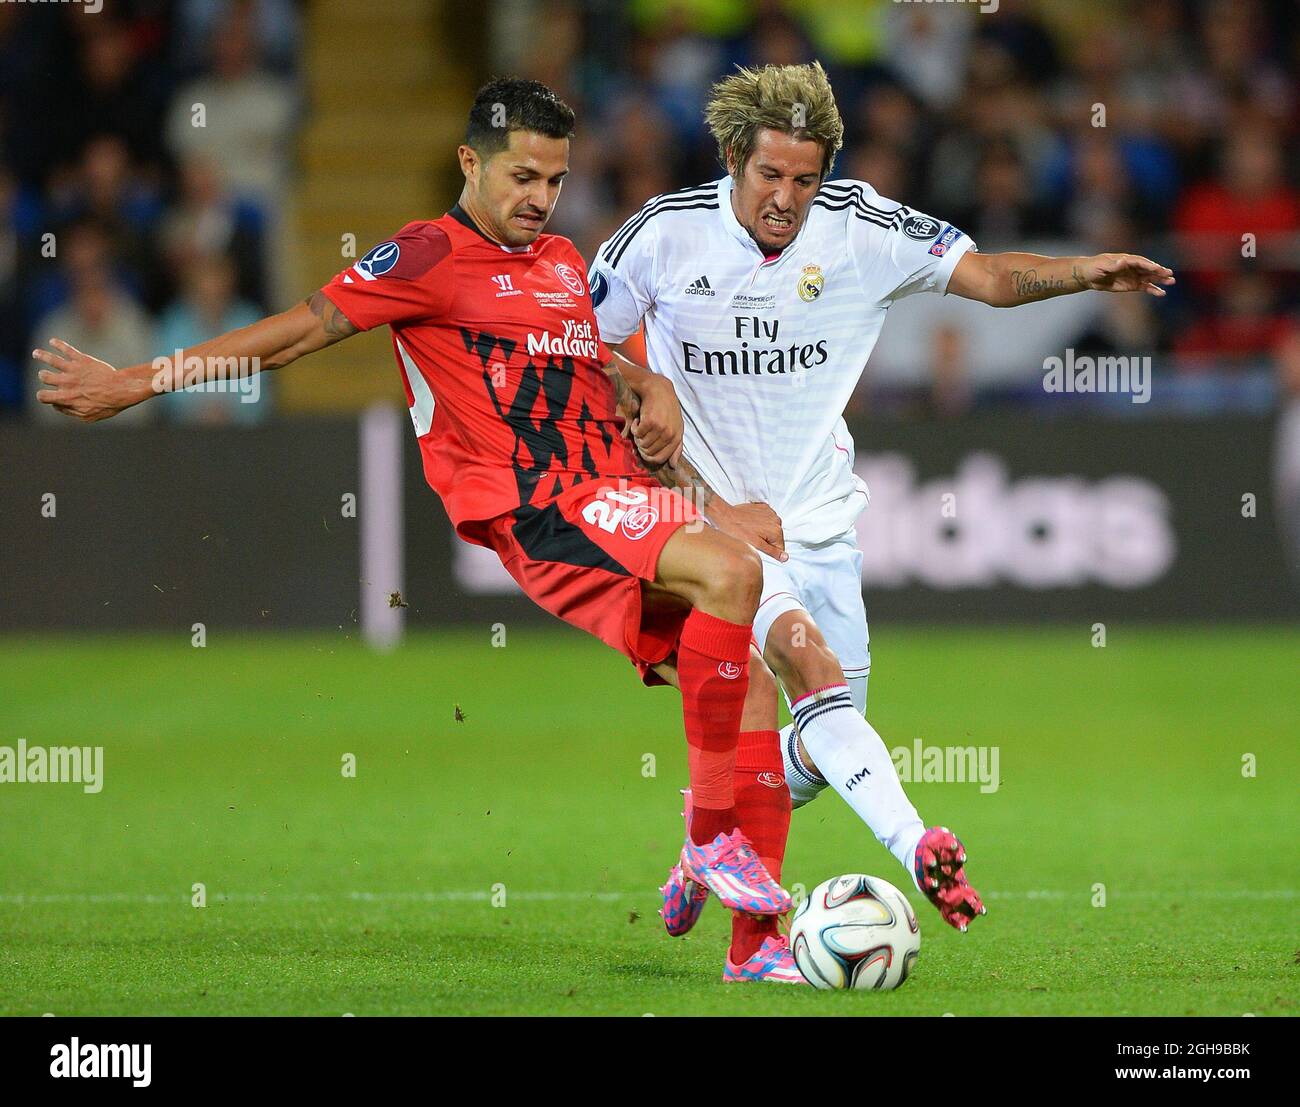 Vitolo of Sevilla tackled by Fabio Coentrao of Real Madrid during the UEFA Super Cup match between Real Madrid and Sevilla at Cardiff City Stadium in Cardiff, Britain on Aug. 12, 2014. Real Madrid won the title by beating Sevilla with 2-0. Pic Simon Bellis/Sportimage. Stock Photo